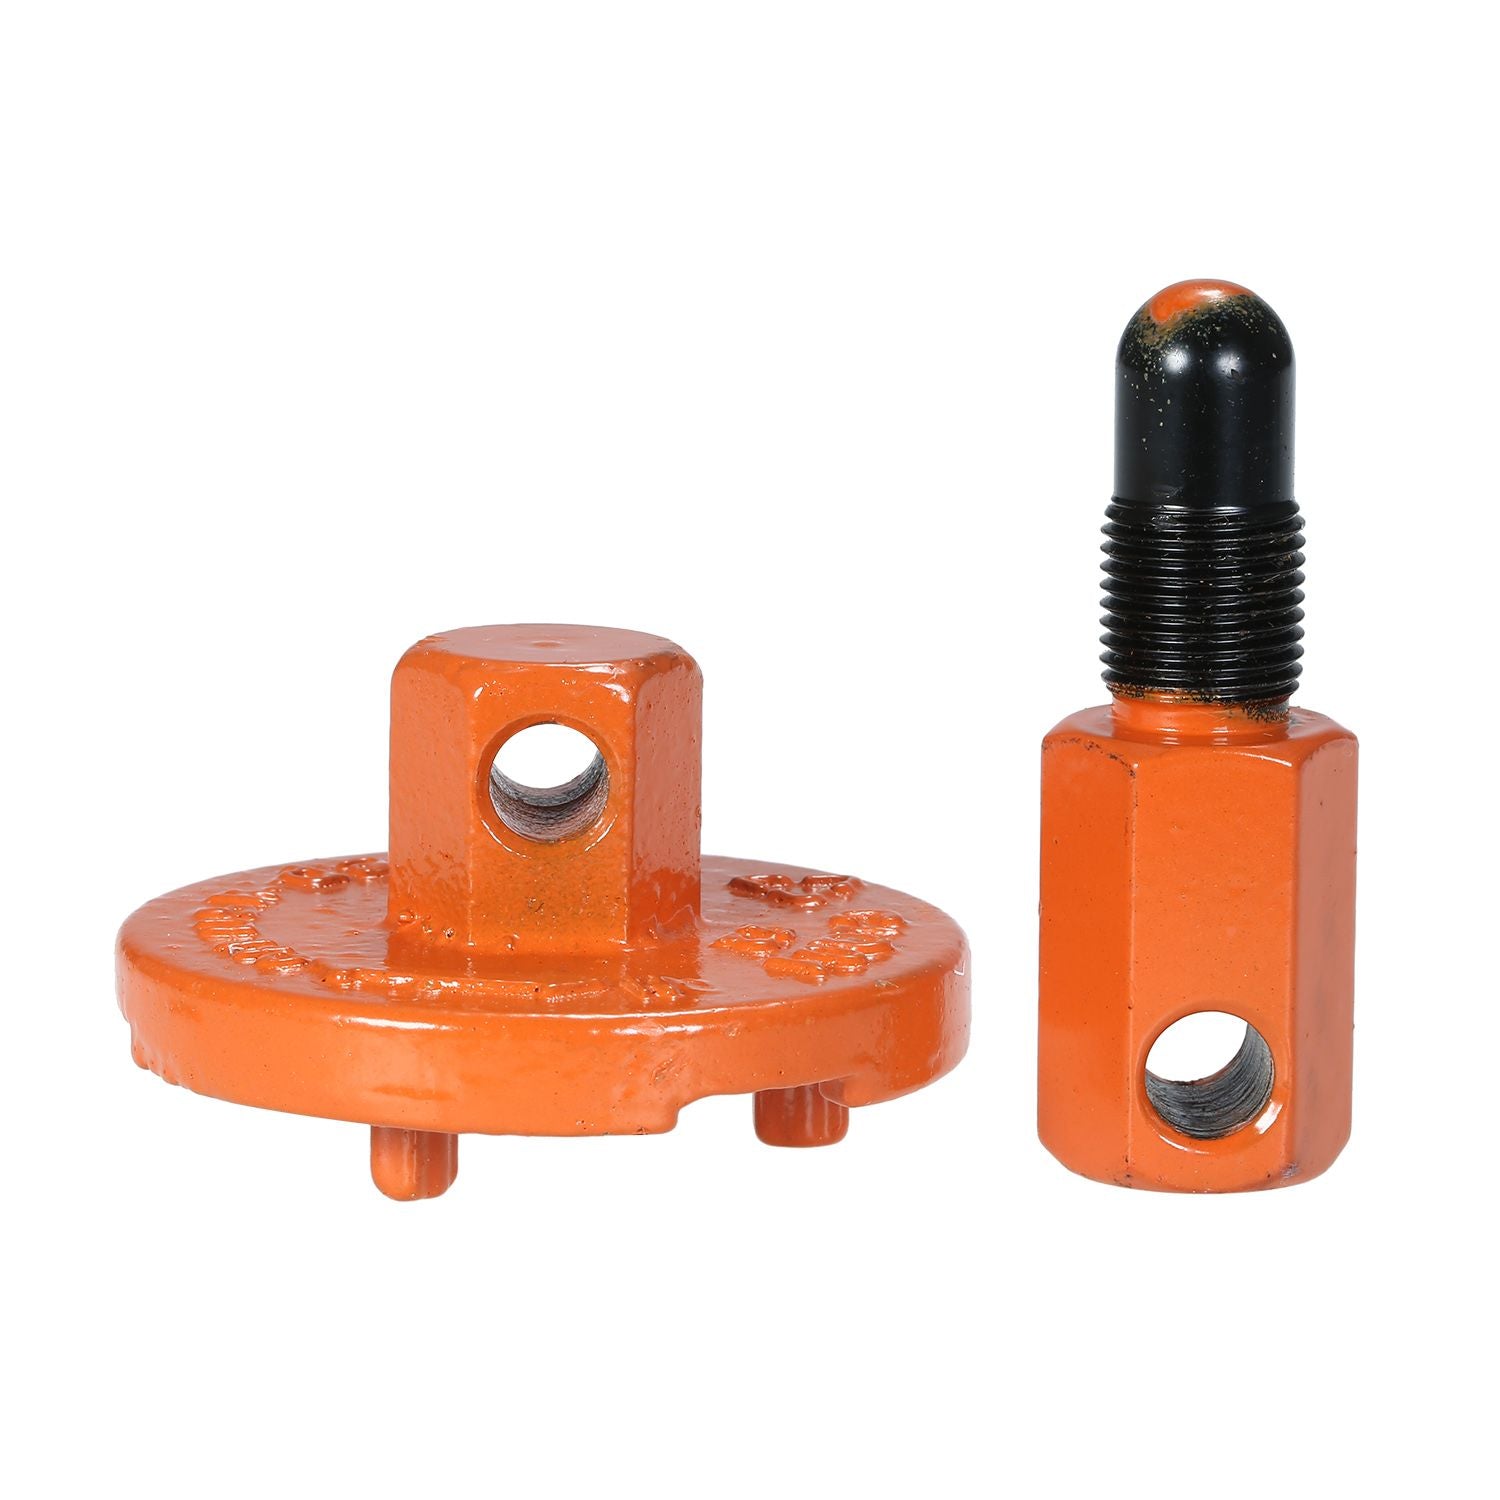 Chainsaw Clutch Removal Tools Universal Piston Stop Clutch